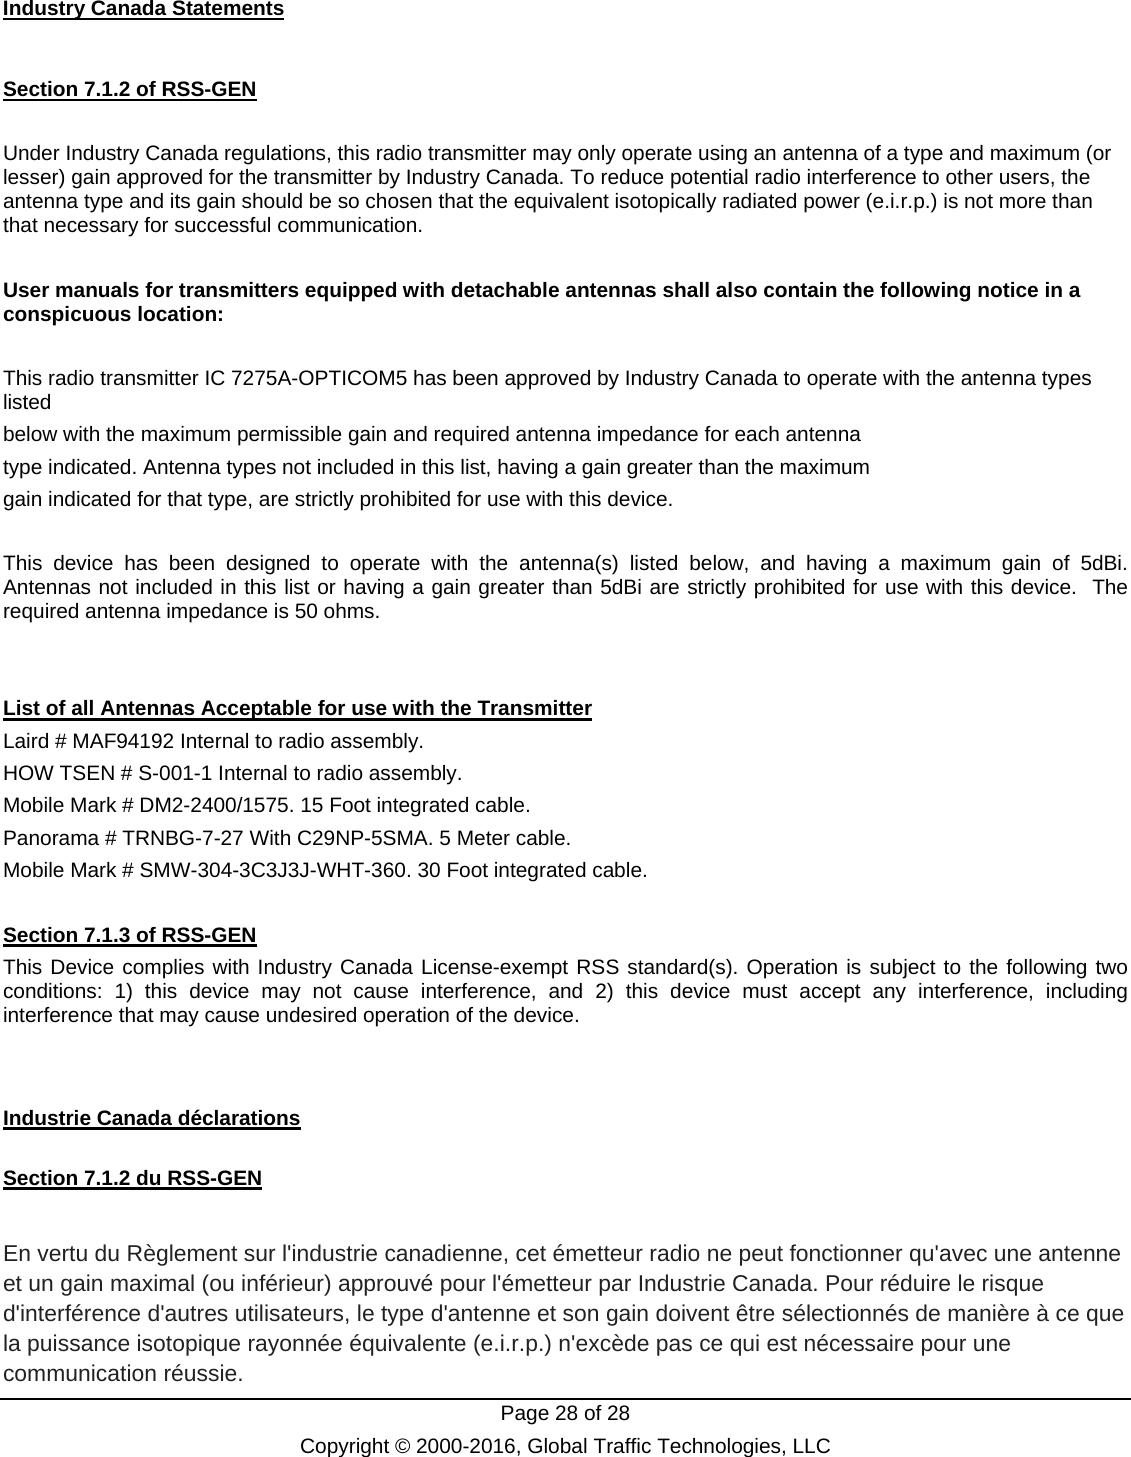   Page 28 of 28 Copyright © 2000-2016, Global Traffic Technologies, LLC Industry Canada Statements  Section 7.1.2 of RSS-GEN  Under Industry Canada regulations, this radio transmitter may only operate using an antenna of a type and maximum (or lesser) gain approved for the transmitter by Industry Canada. To reduce potential radio interference to other users, the antenna type and its gain should be so chosen that the equivalent isotopically radiated power (e.i.r.p.) is not more than that necessary for successful communication.  User manuals for transmitters equipped with detachable antennas shall also contain the following notice in a conspicuous location:  This radio transmitter IC 7275A-OPTICOM5 has been approved by Industry Canada to operate with the antenna types listed below with the maximum permissible gain and required antenna impedance for each antenna type indicated. Antenna types not included in this list, having a gain greater than the maximum gain indicated for that type, are strictly prohibited for use with this device.  This device has been designed to operate with the antenna(s) listed below, and having a maximum gain of 5dBi.  Antennas not included in this list or having a gain greater than 5dBi are strictly prohibited for use with this device.  The required antenna impedance is 50 ohms.   List of all Antennas Acceptable for use with the Transmitter Laird # MAF94192 Internal to radio assembly. HOW TSEN # S-001-1 Internal to radio assembly. Mobile Mark # DM2-2400/1575. 15 Foot integrated cable.  Panorama # TRNBG-7-27 With C29NP-5SMA. 5 Meter cable. Mobile Mark # SMW-304-3C3J3J-WHT-360. 30 Foot integrated cable.  Section 7.1.3 of RSS-GEN This Device complies with Industry Canada License-exempt RSS standard(s). Operation is subject to the following two conditions: 1) this device may not cause interference, and 2) this device must accept any interference, including interference that may cause undesired operation of the device.   Industrie Canada déclarations  Section 7.1.2 du RSS-GEN  En vertu du Règlement sur l&apos;industrie canadienne, cet émetteur radio ne peut fonctionner qu&apos;avec une antenne et un gain maximal (ou inférieur) approuvé pour l&apos;émetteur par Industrie Canada. Pour réduire le risque d&apos;interférence d&apos;autres utilisateurs, le type d&apos;antenne et son gain doivent être sélectionnés de manière à ce que la puissance isotopique rayonnée équivalente (e.i.r.p.) n&apos;excède pas ce qui est nécessaire pour une communication réussie. 